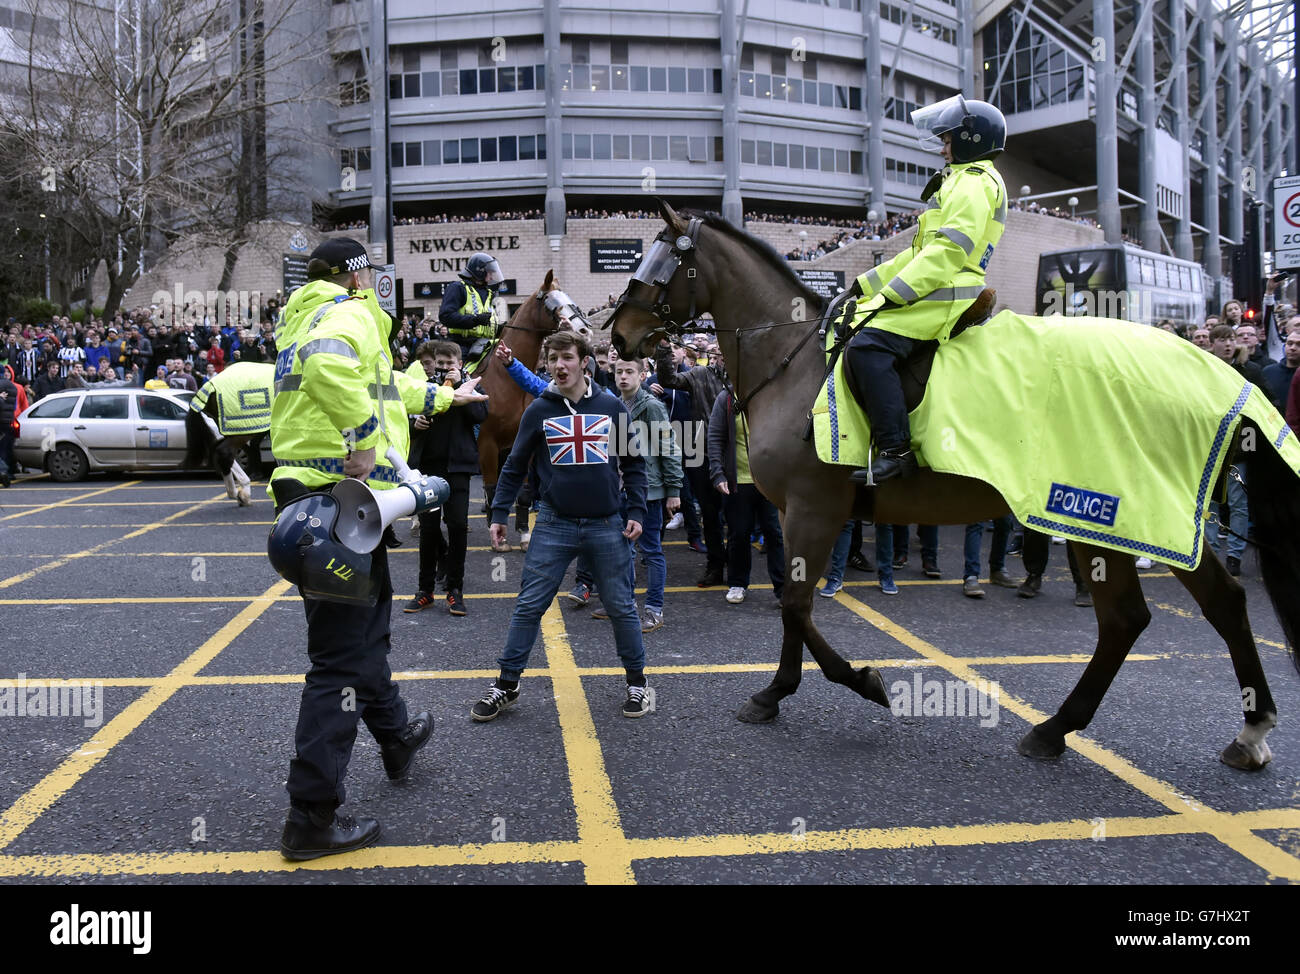 Police and mounted police manage the crowd outside St. James' Park as fans begin to arrive for the Barclays Premier League match at St. James' Park, Newcastle. Stock Photo